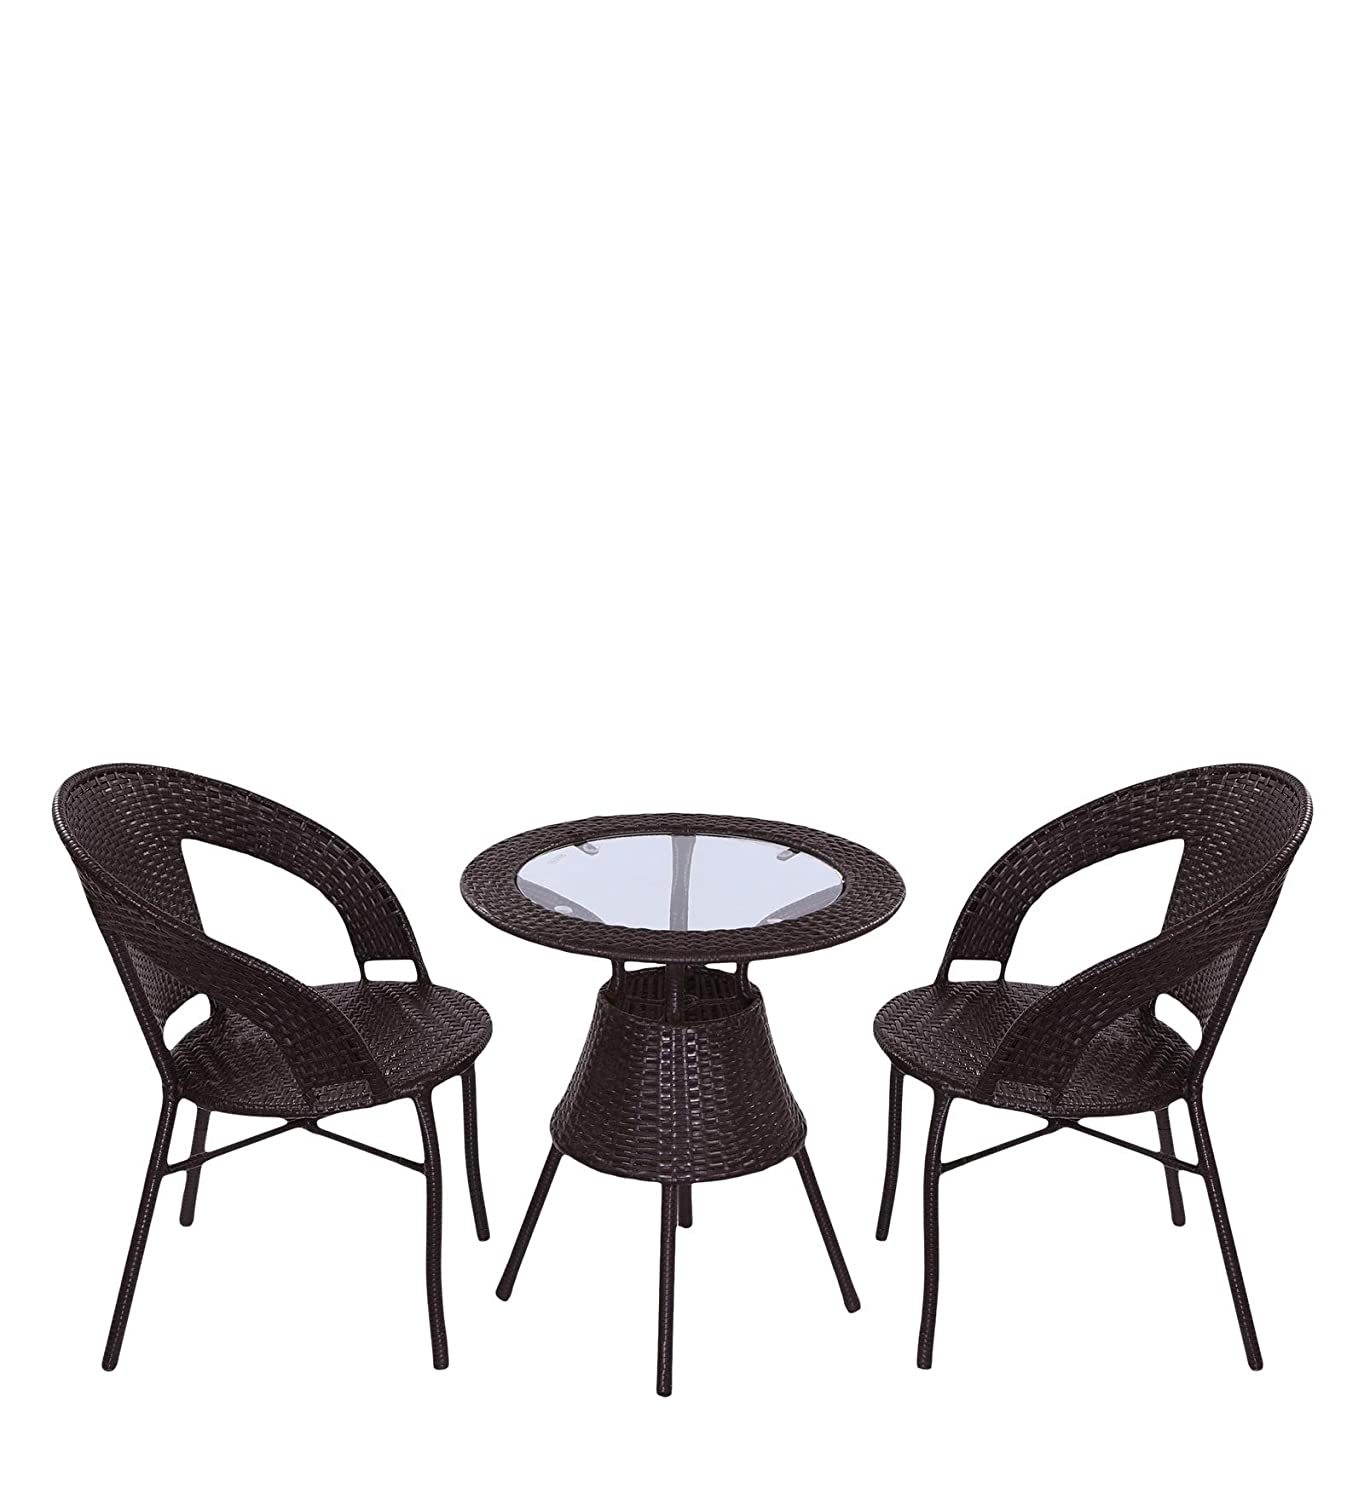 Anayadecore Outdoor Furniture Garden, Outdoor Table And Seating Sets